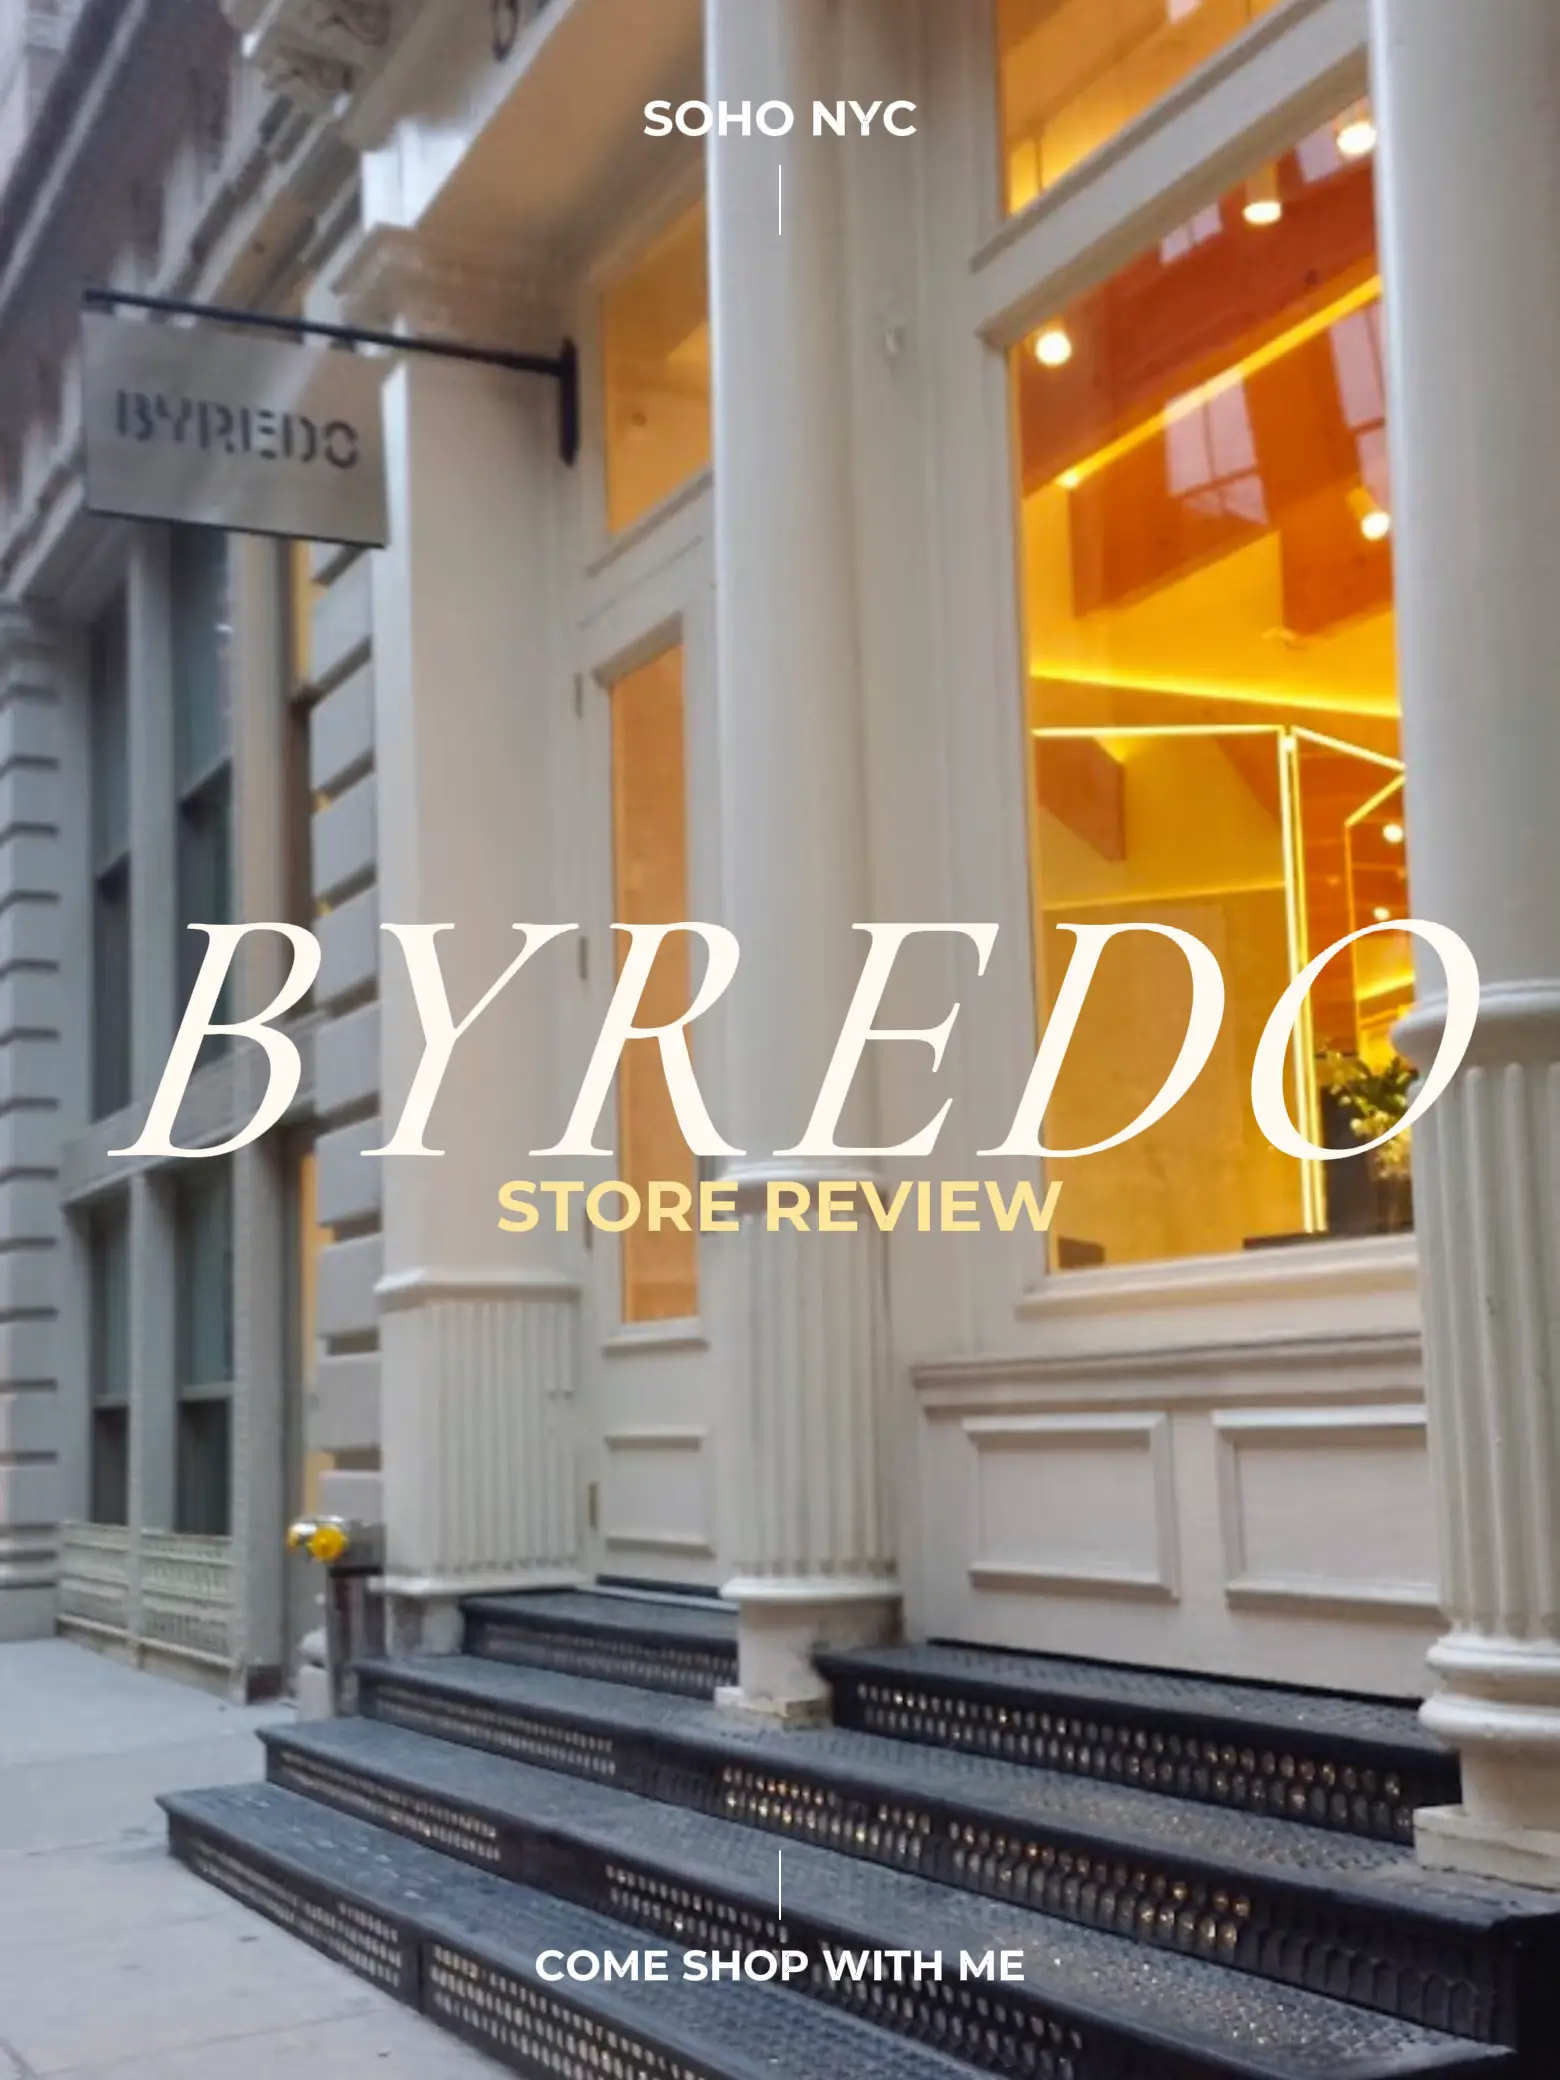 Byredo Brings Its Scent Memories to SoHo - The New York Times